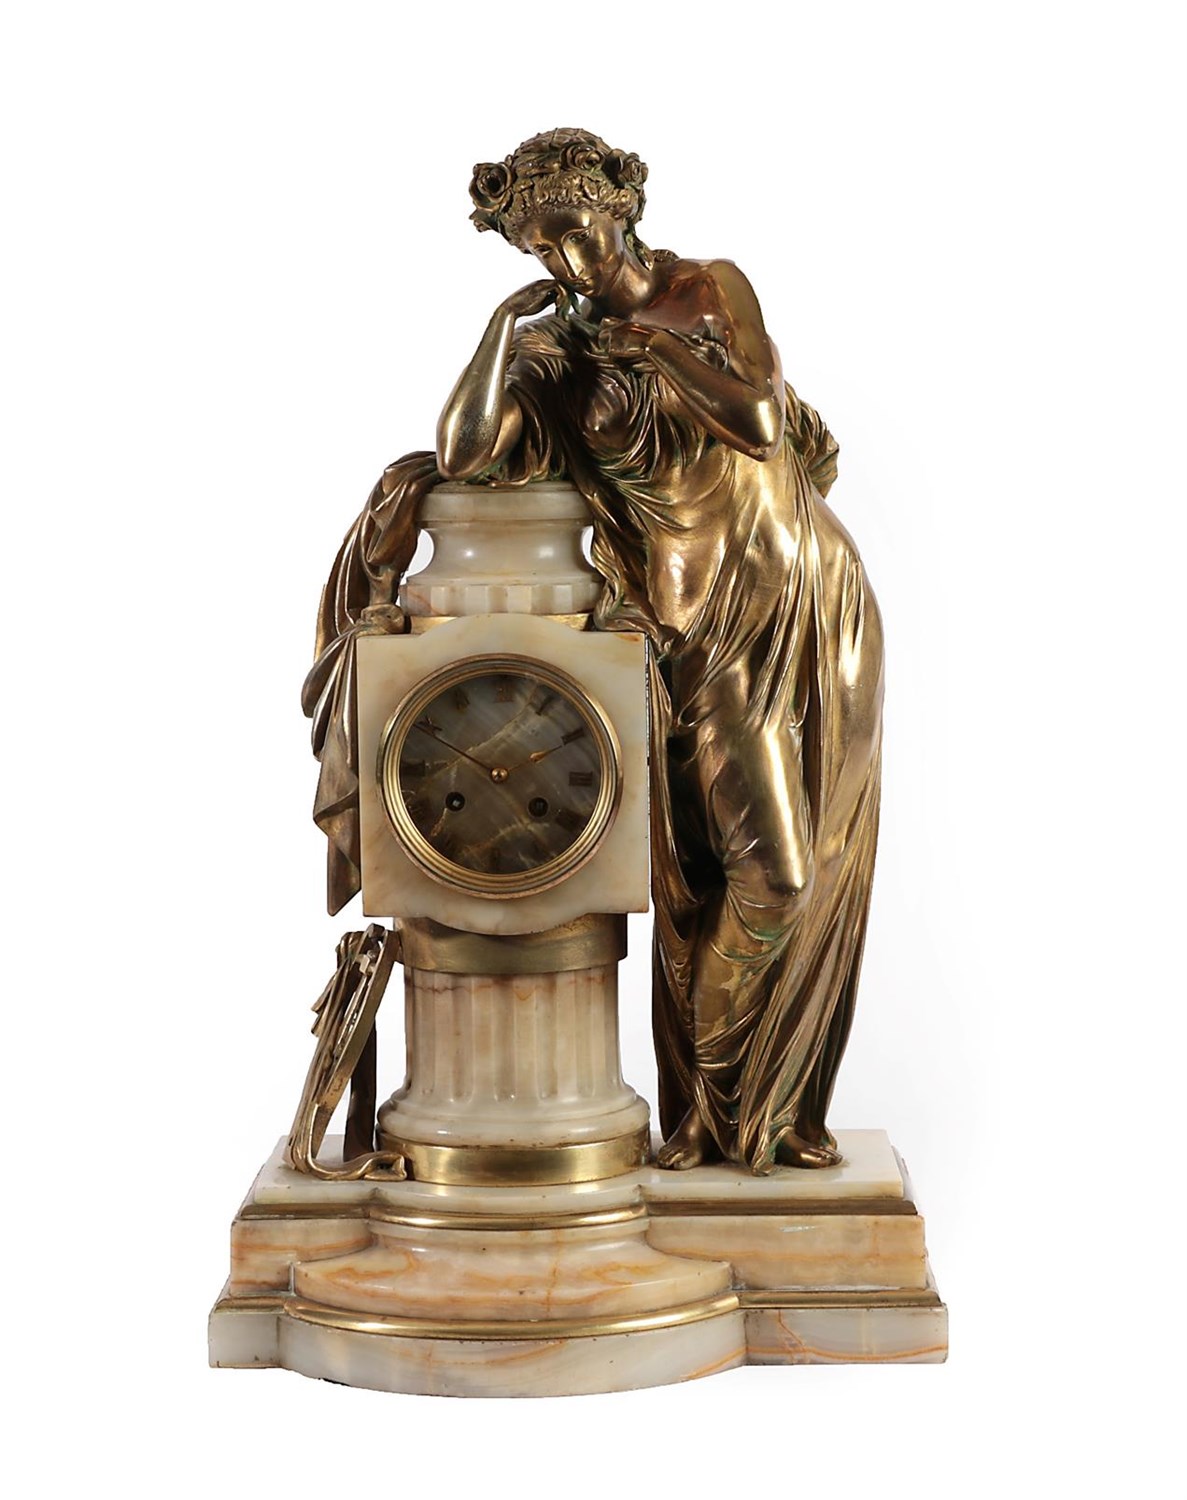 Lot 406 - A Figural Gilt Bronze and Marble Striking Mantel Clock, circa 1870, depicting a gilt bronze lady in